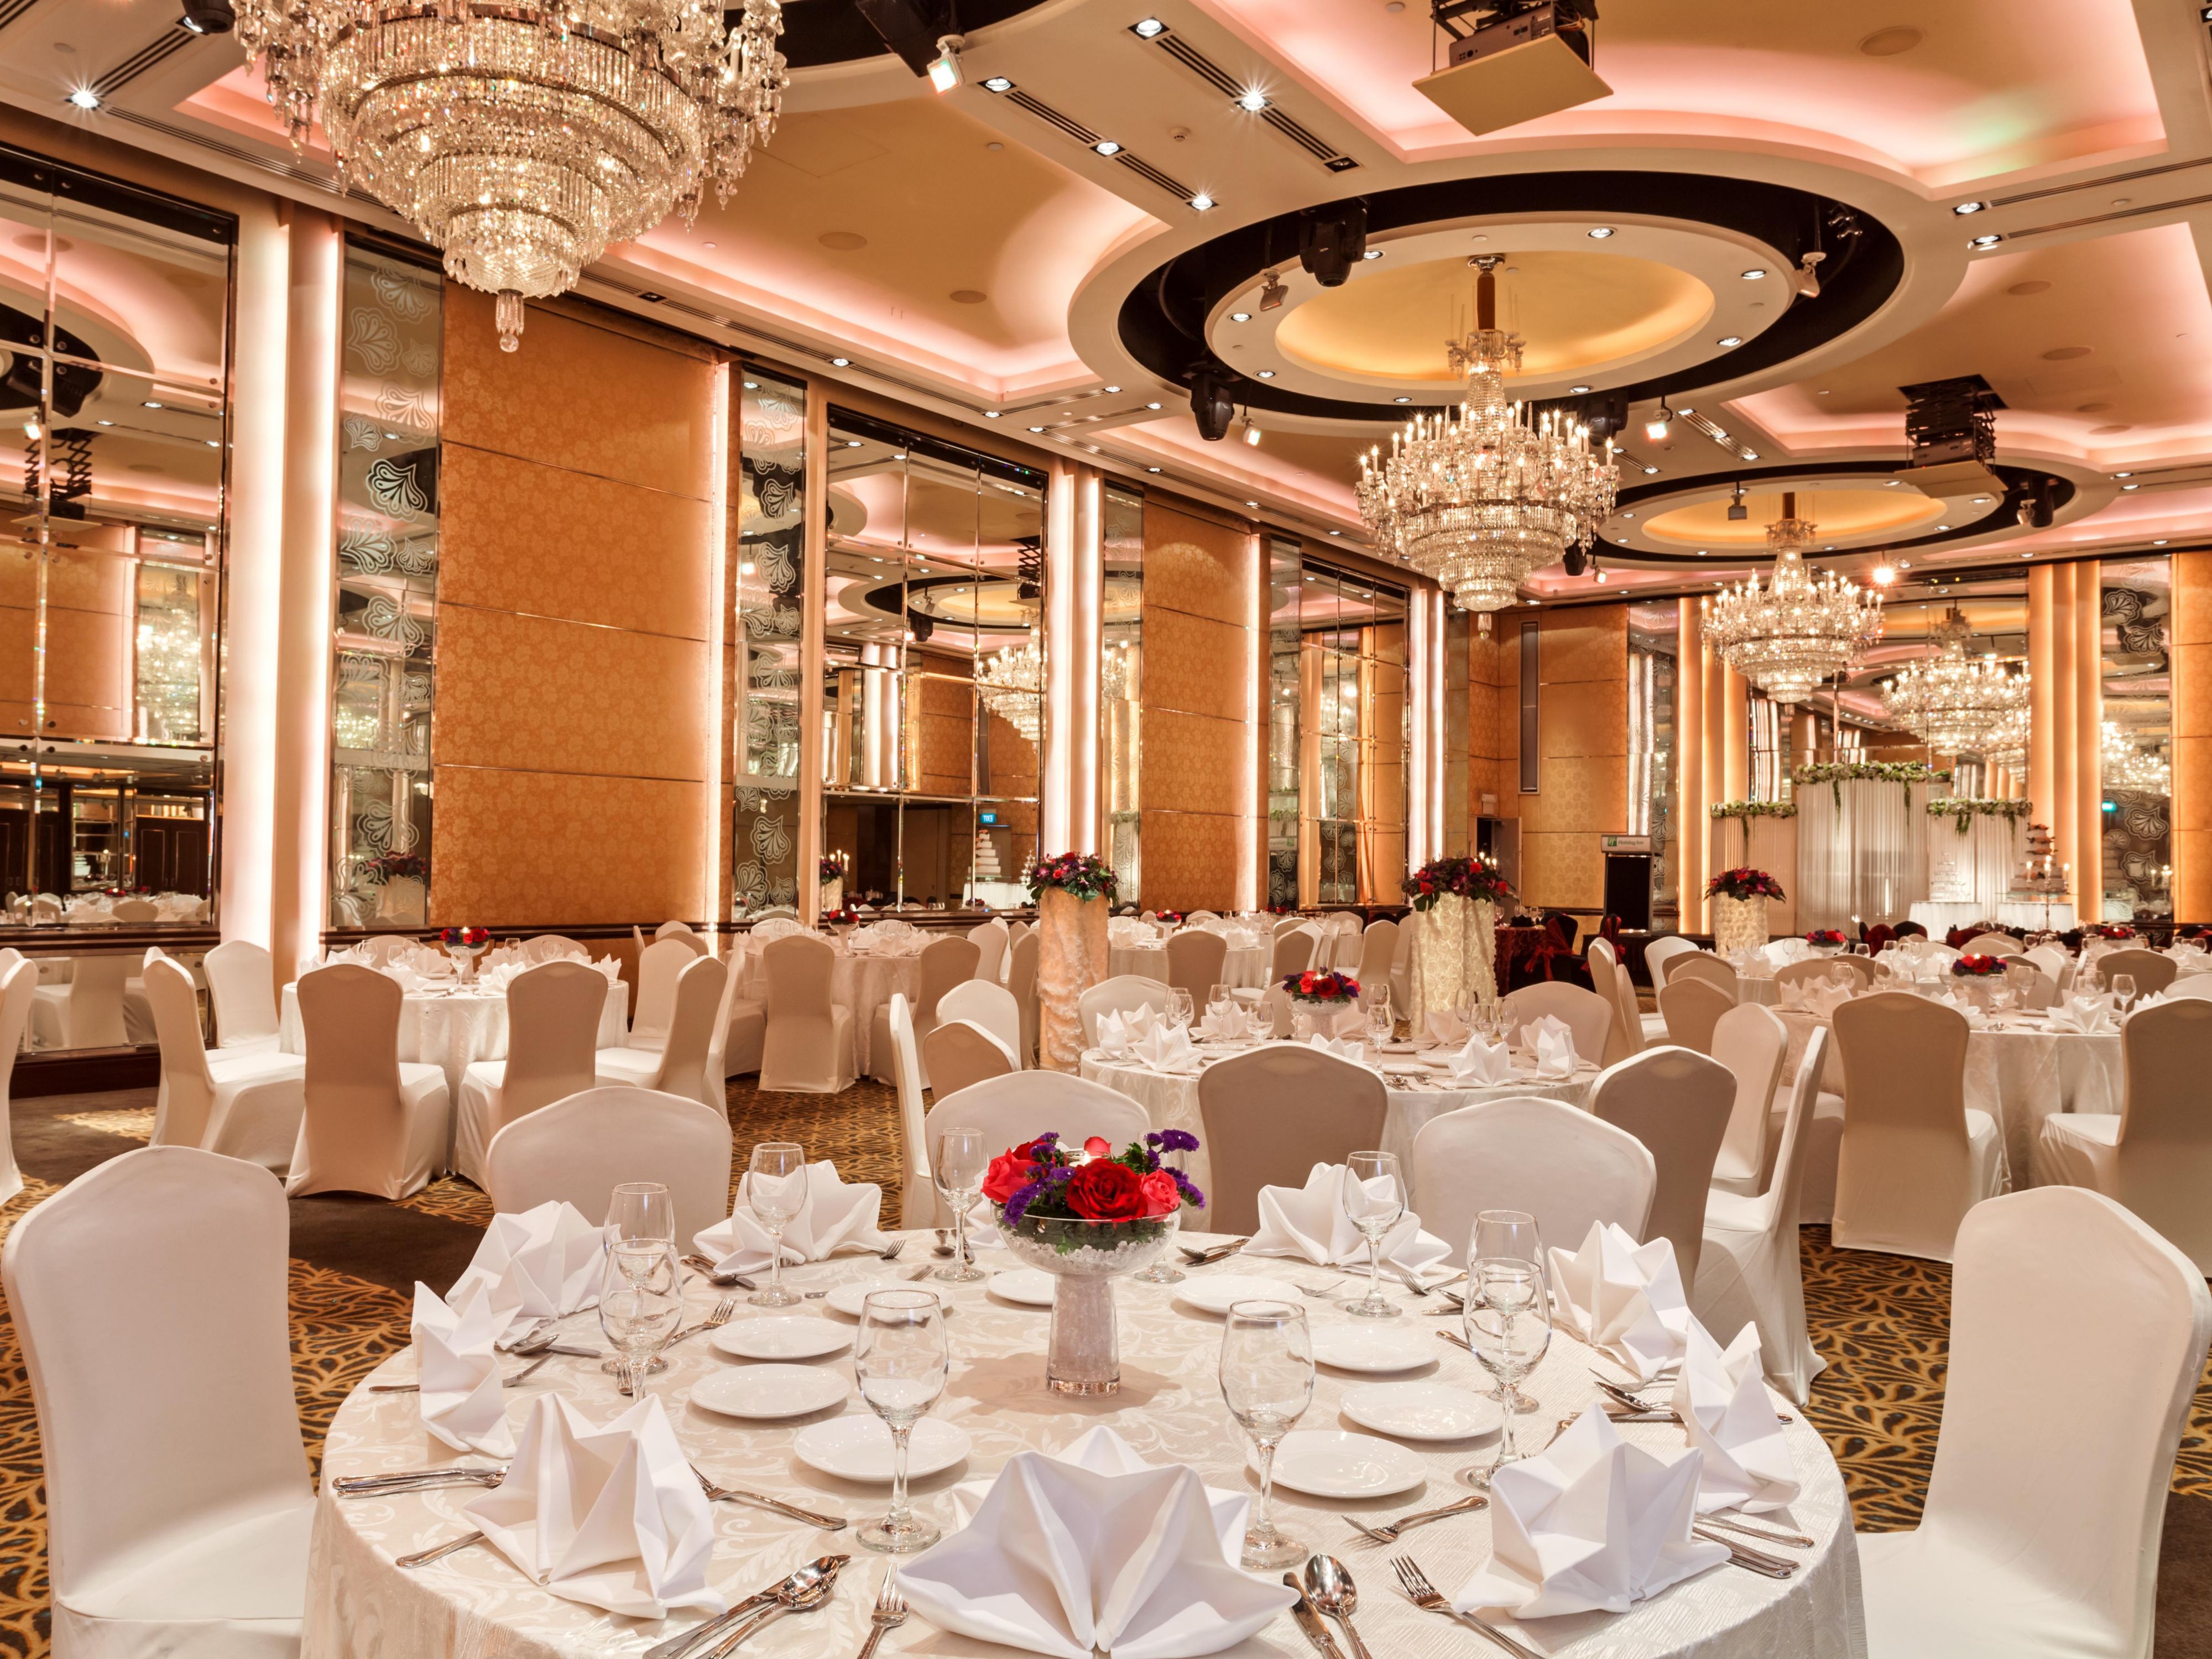 Offering second-to-none wedding services with a dedicated team that will help you customise your ideal wedding package, the hotel features high ceiling ballrooms, glittering chandeliers, adjustable mood lighting and live-feed capabilities. It is the perfect venue for mini to large scale weddings.